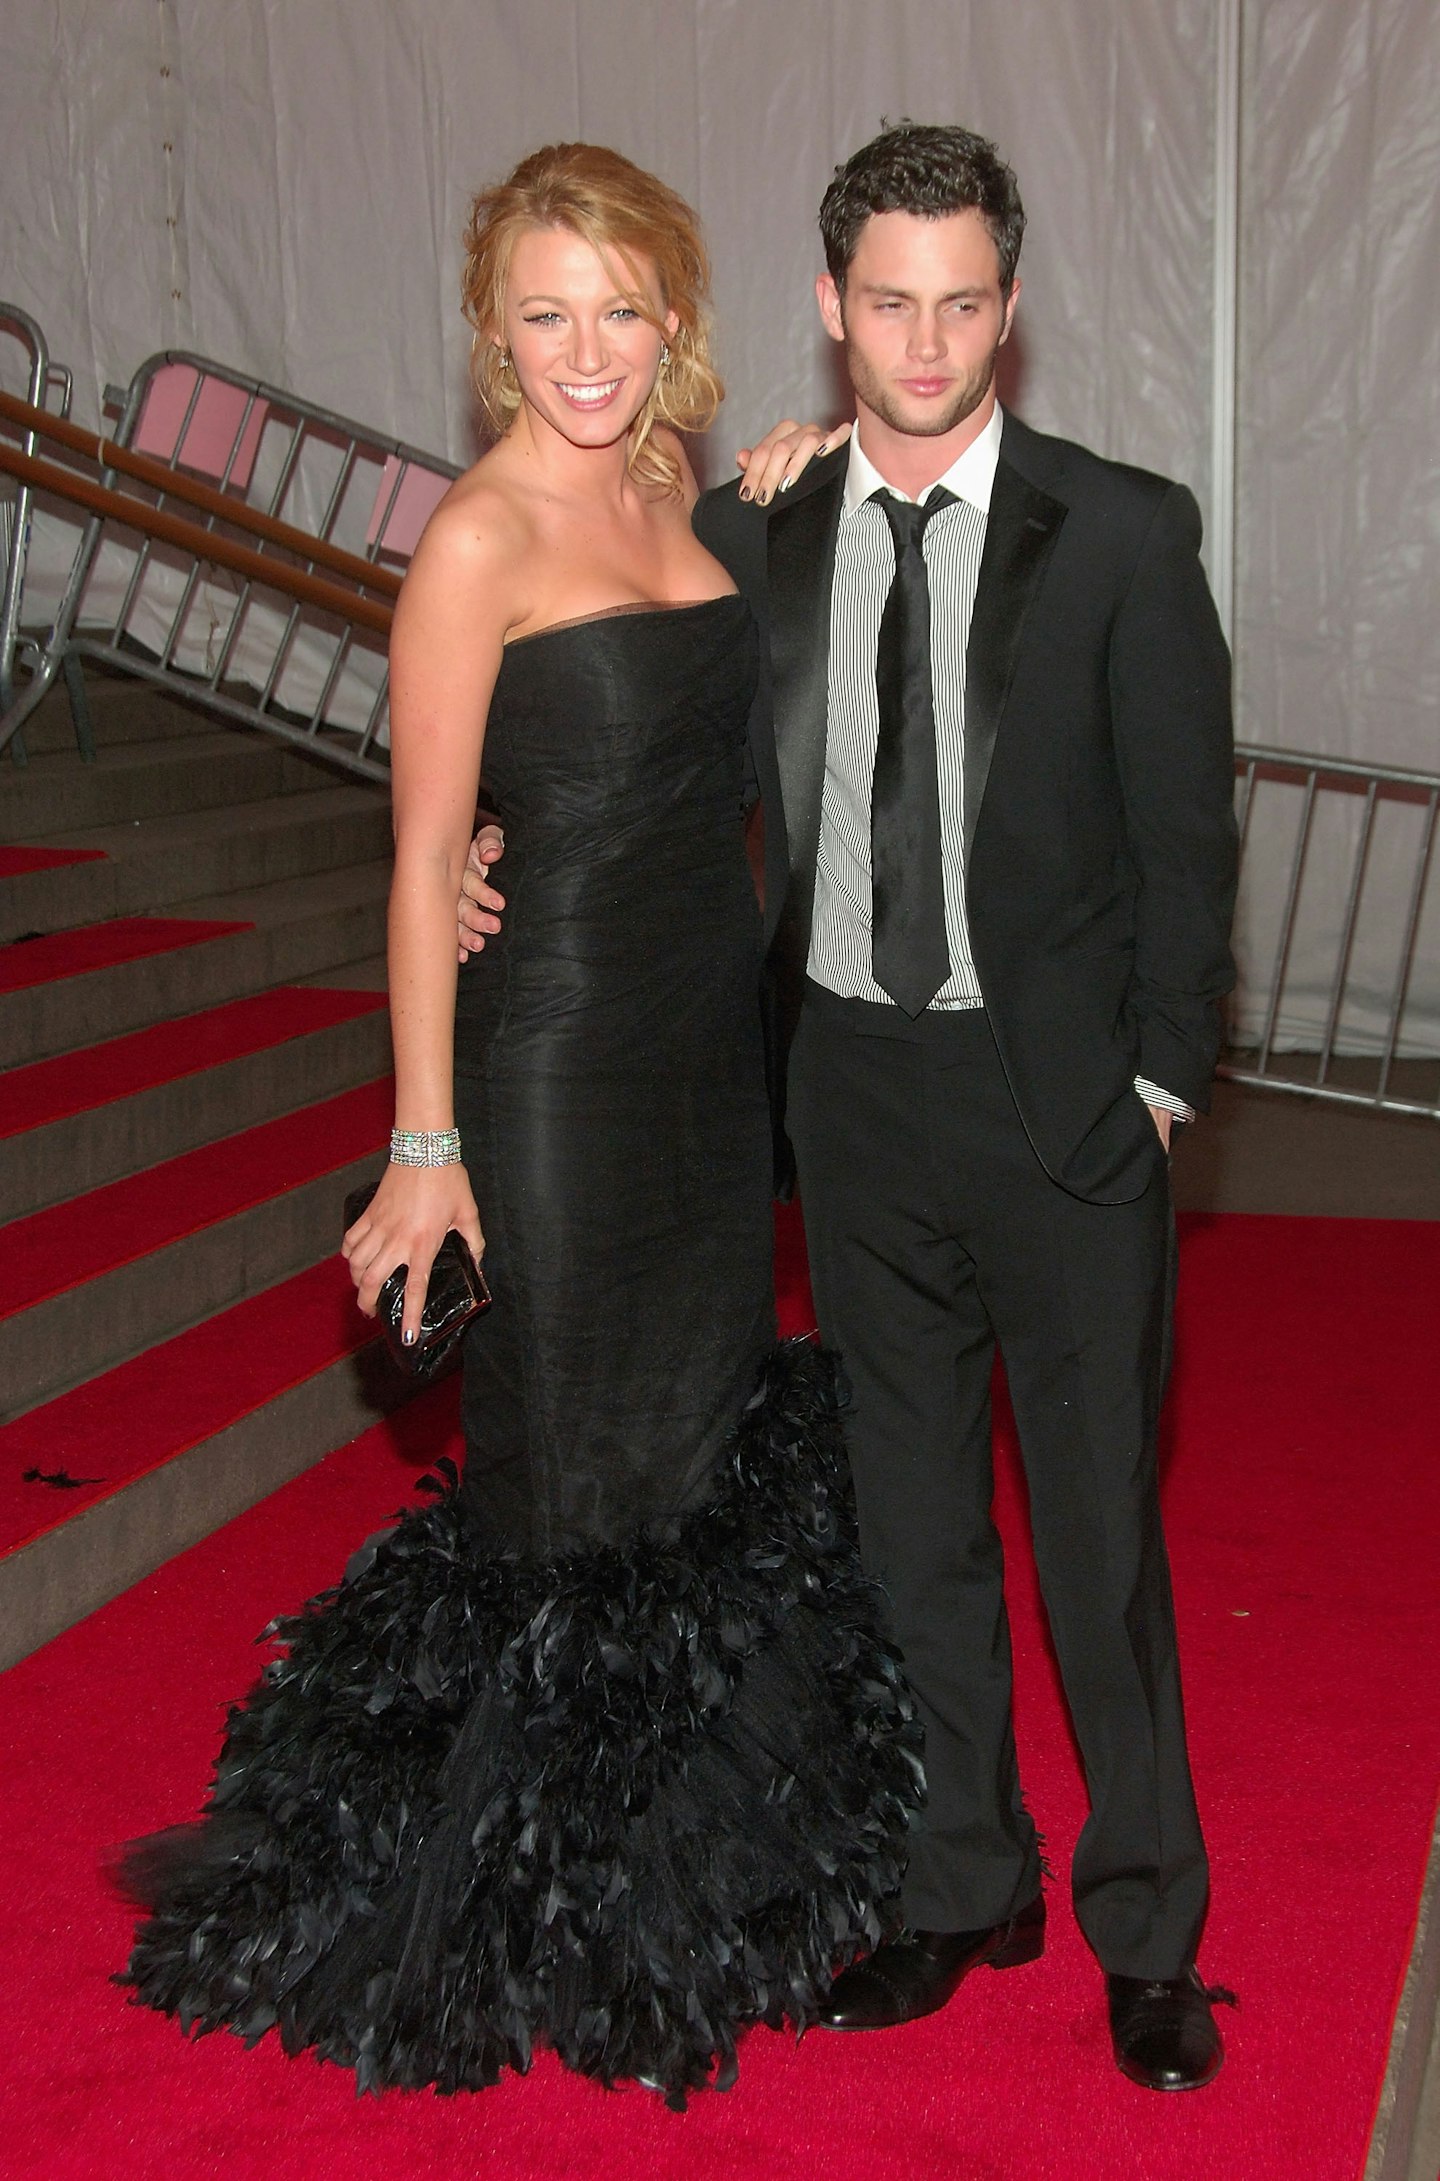 Blake Lively and Penn Badgley at the Met Gala 2008